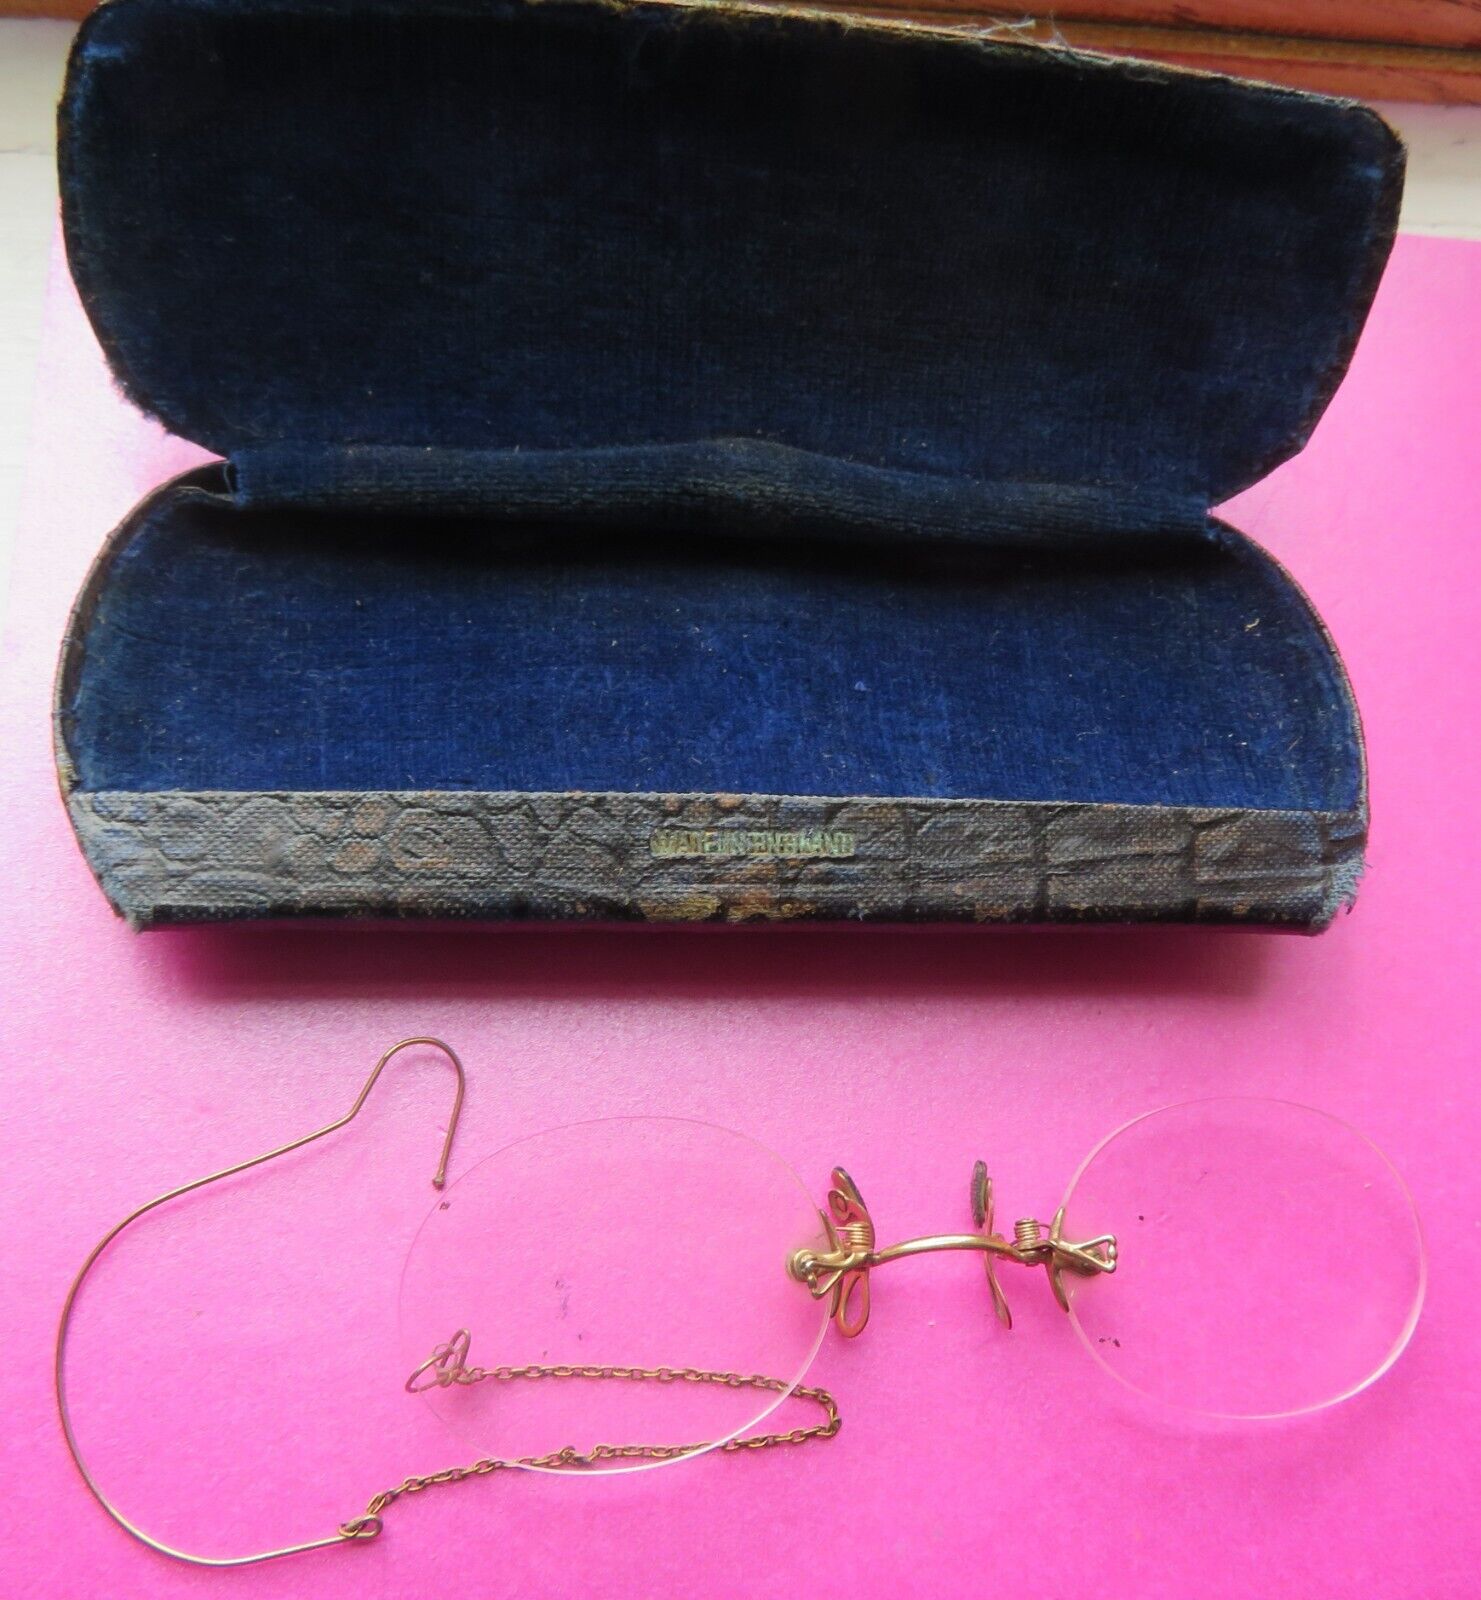 SPRUNG EYE | ANTIQUE NOSE HOOK ON CHAIN,CASED eBay GLASSES,WITH EAR ARCH NEZ PINCE